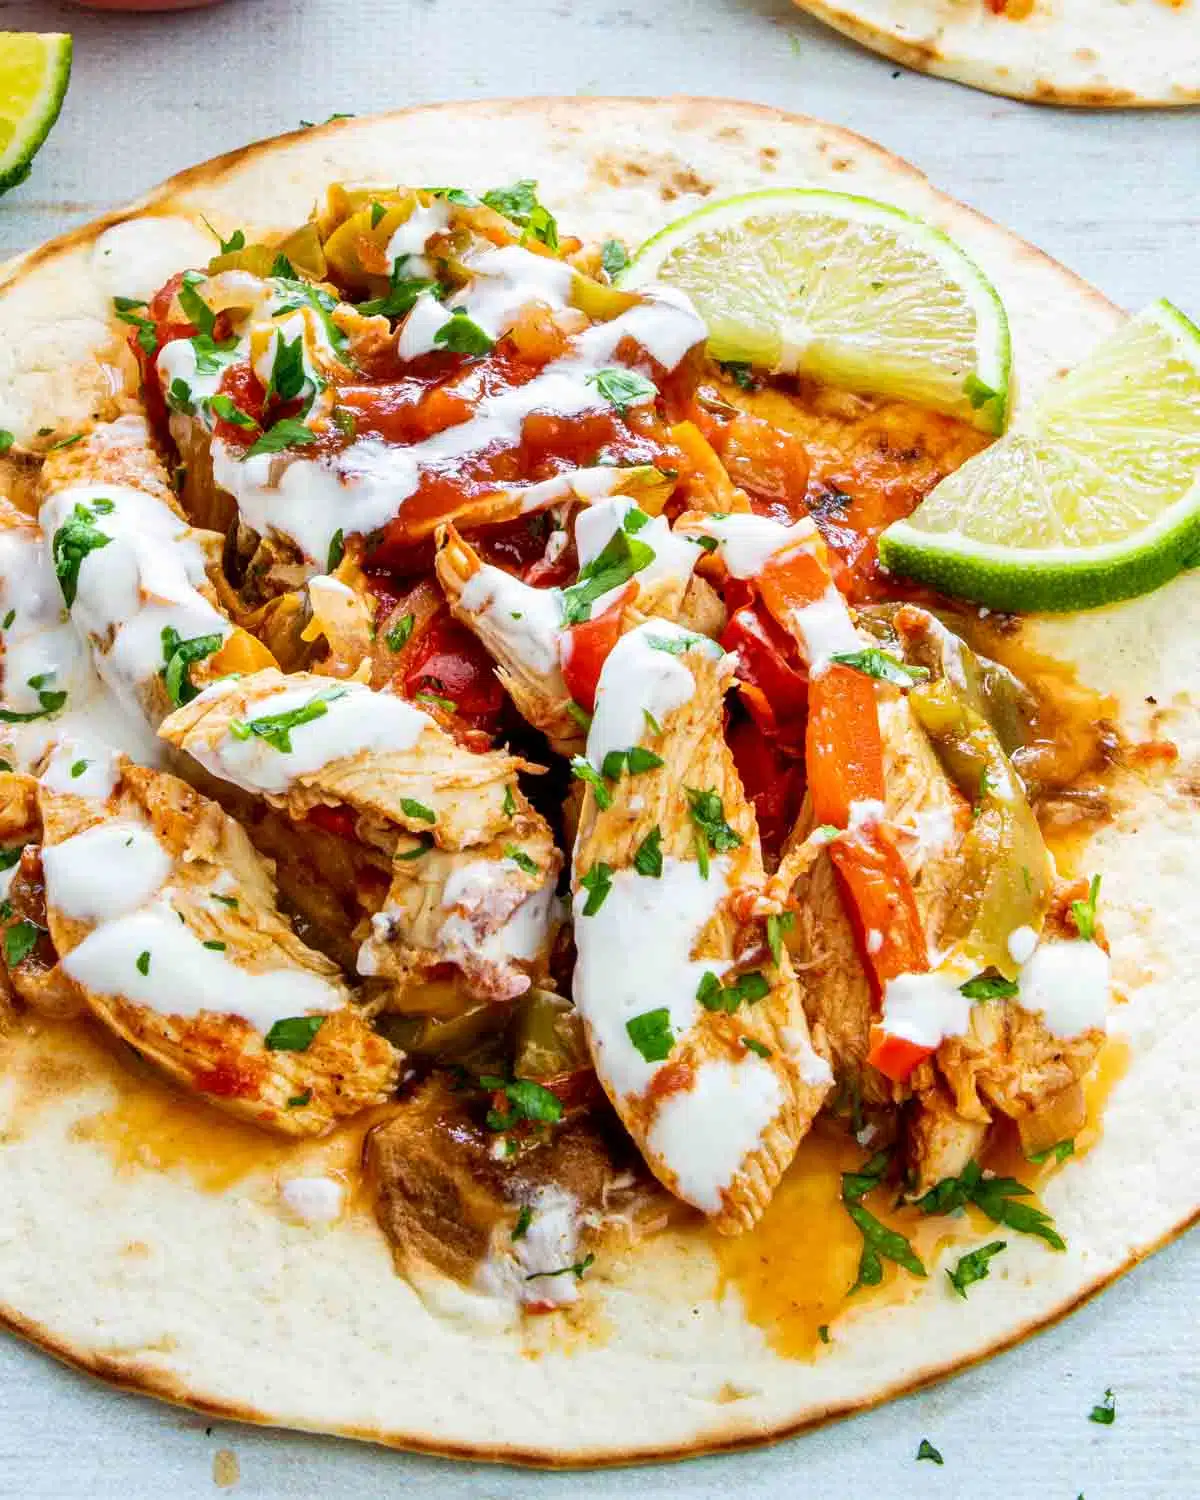 chicken fajitas on a tortilla garnished with sour cream and limes.